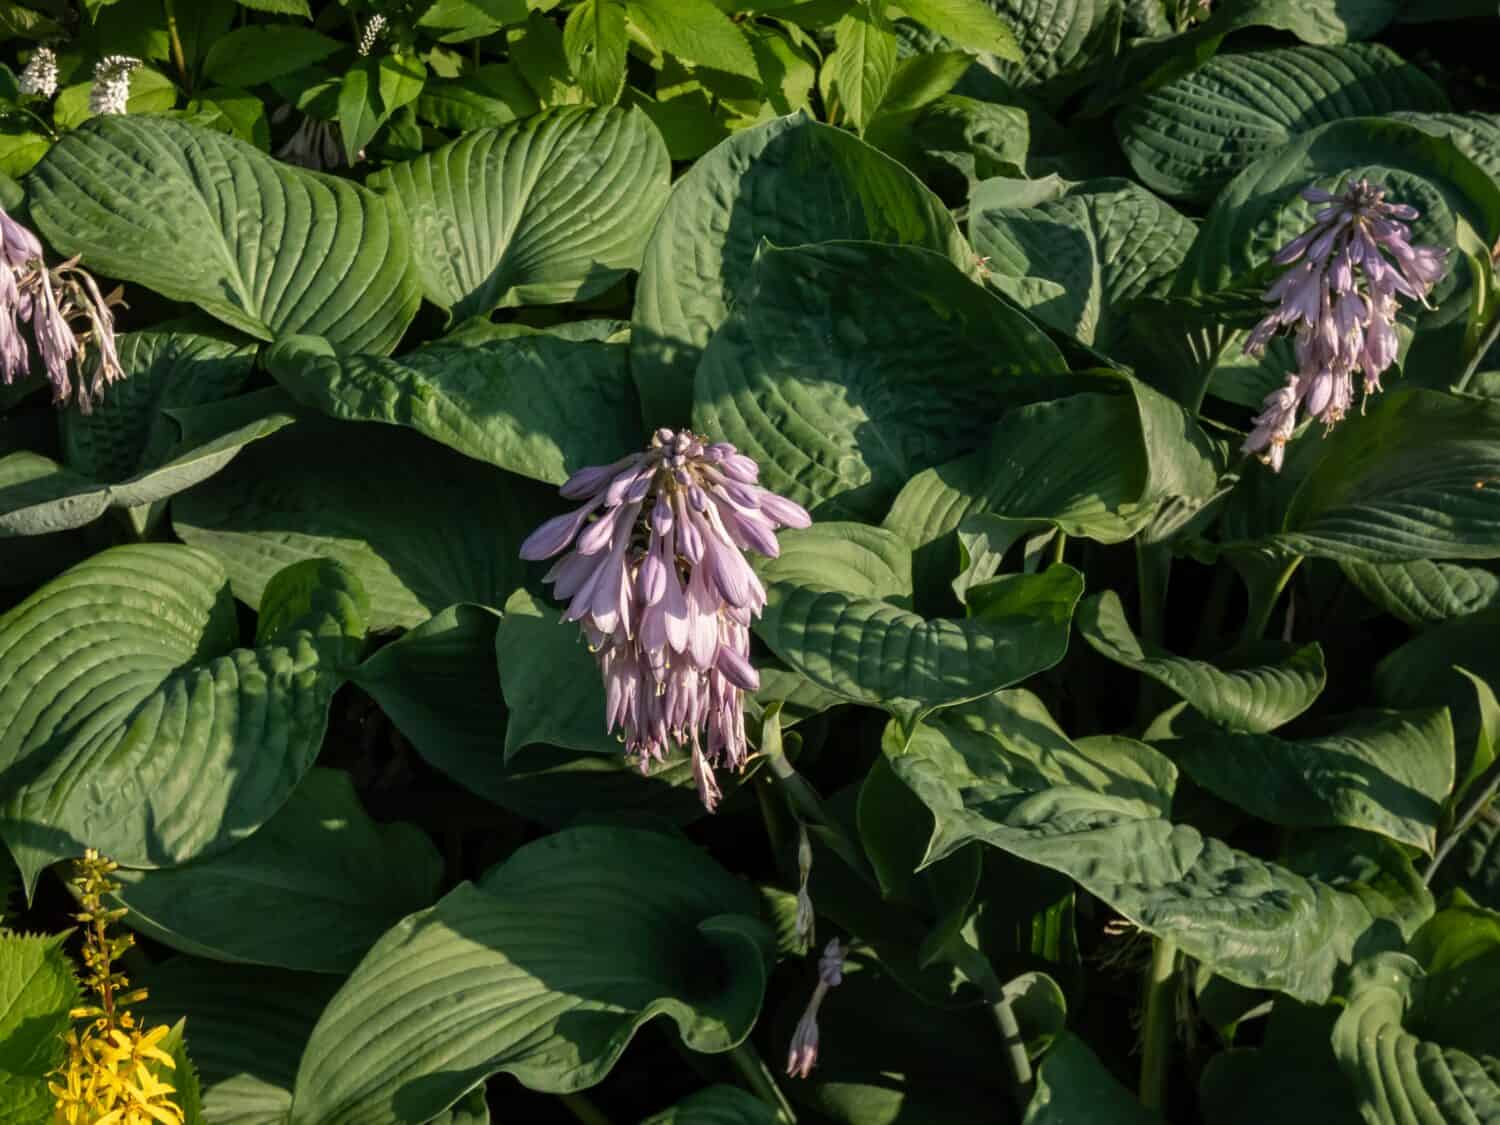 One of the largest Hosta ′Blue Umbrellas′ with giant, blue-green, thick-textured, corrugated, heart shaped leaves and pale lavender flowers growing in the garden in summer